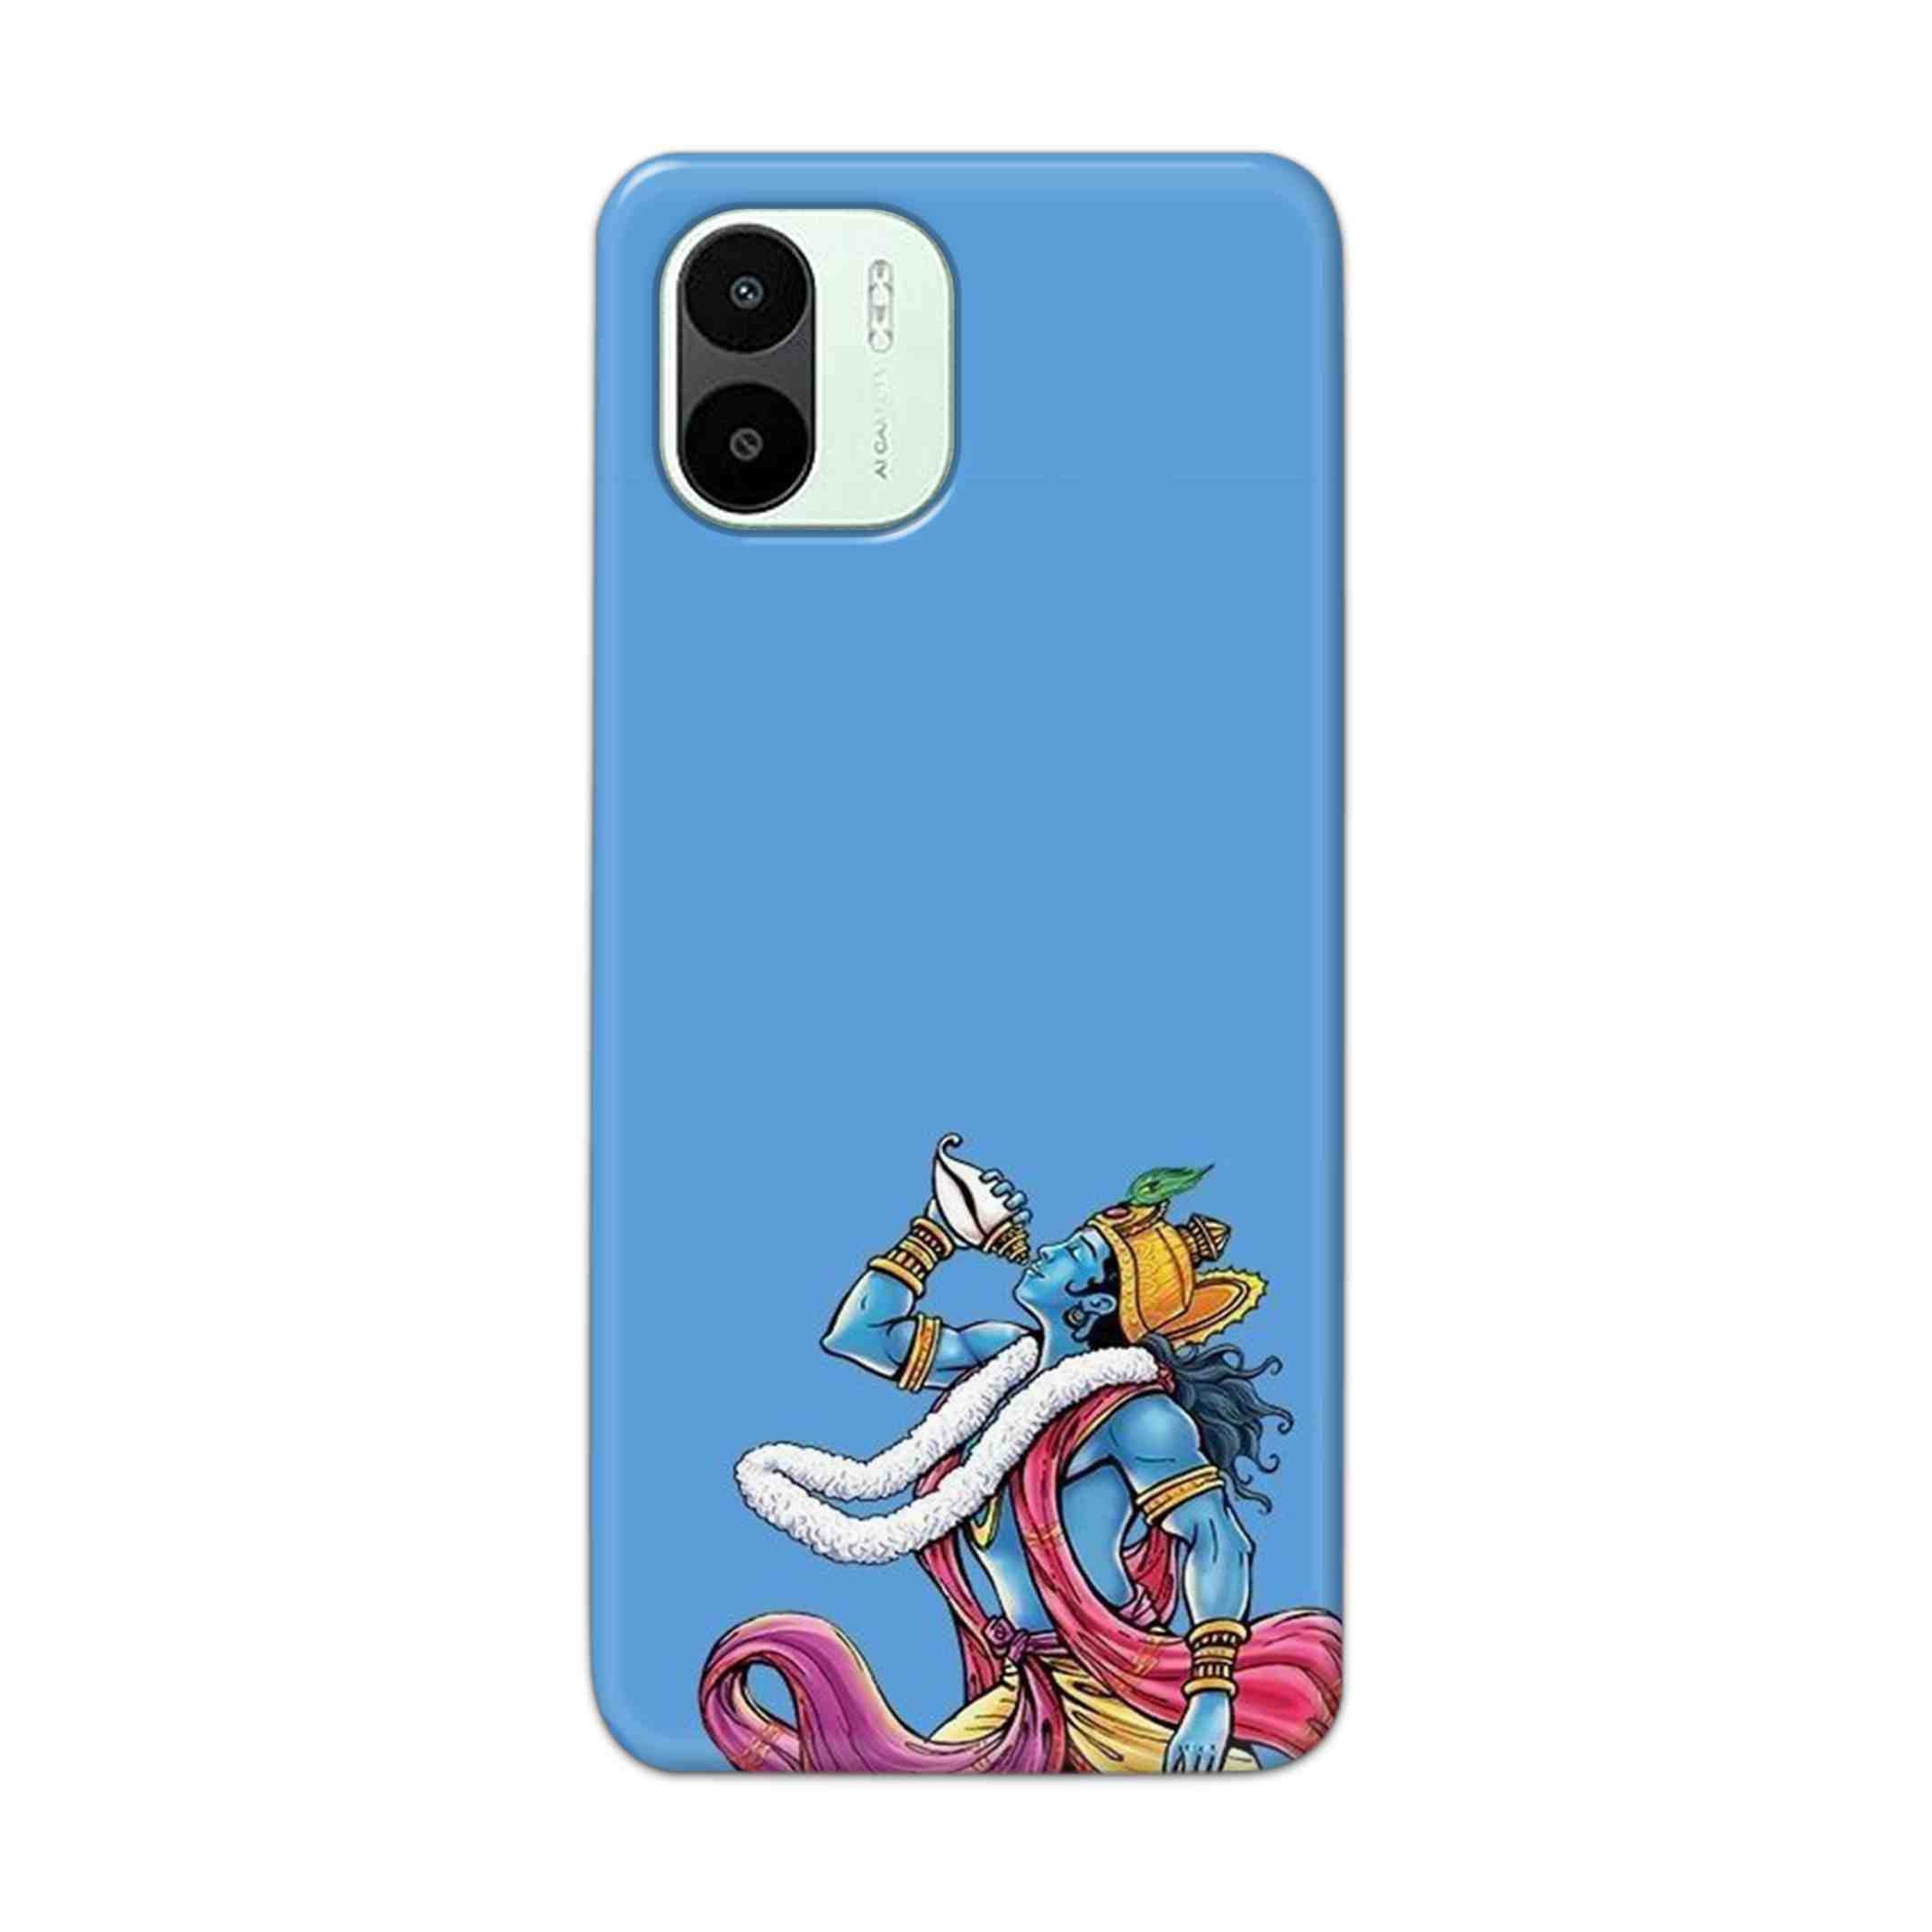 Buy Krishna Hard Back Mobile Phone Case Cover For Xiaomi Redmi A1 5G Online